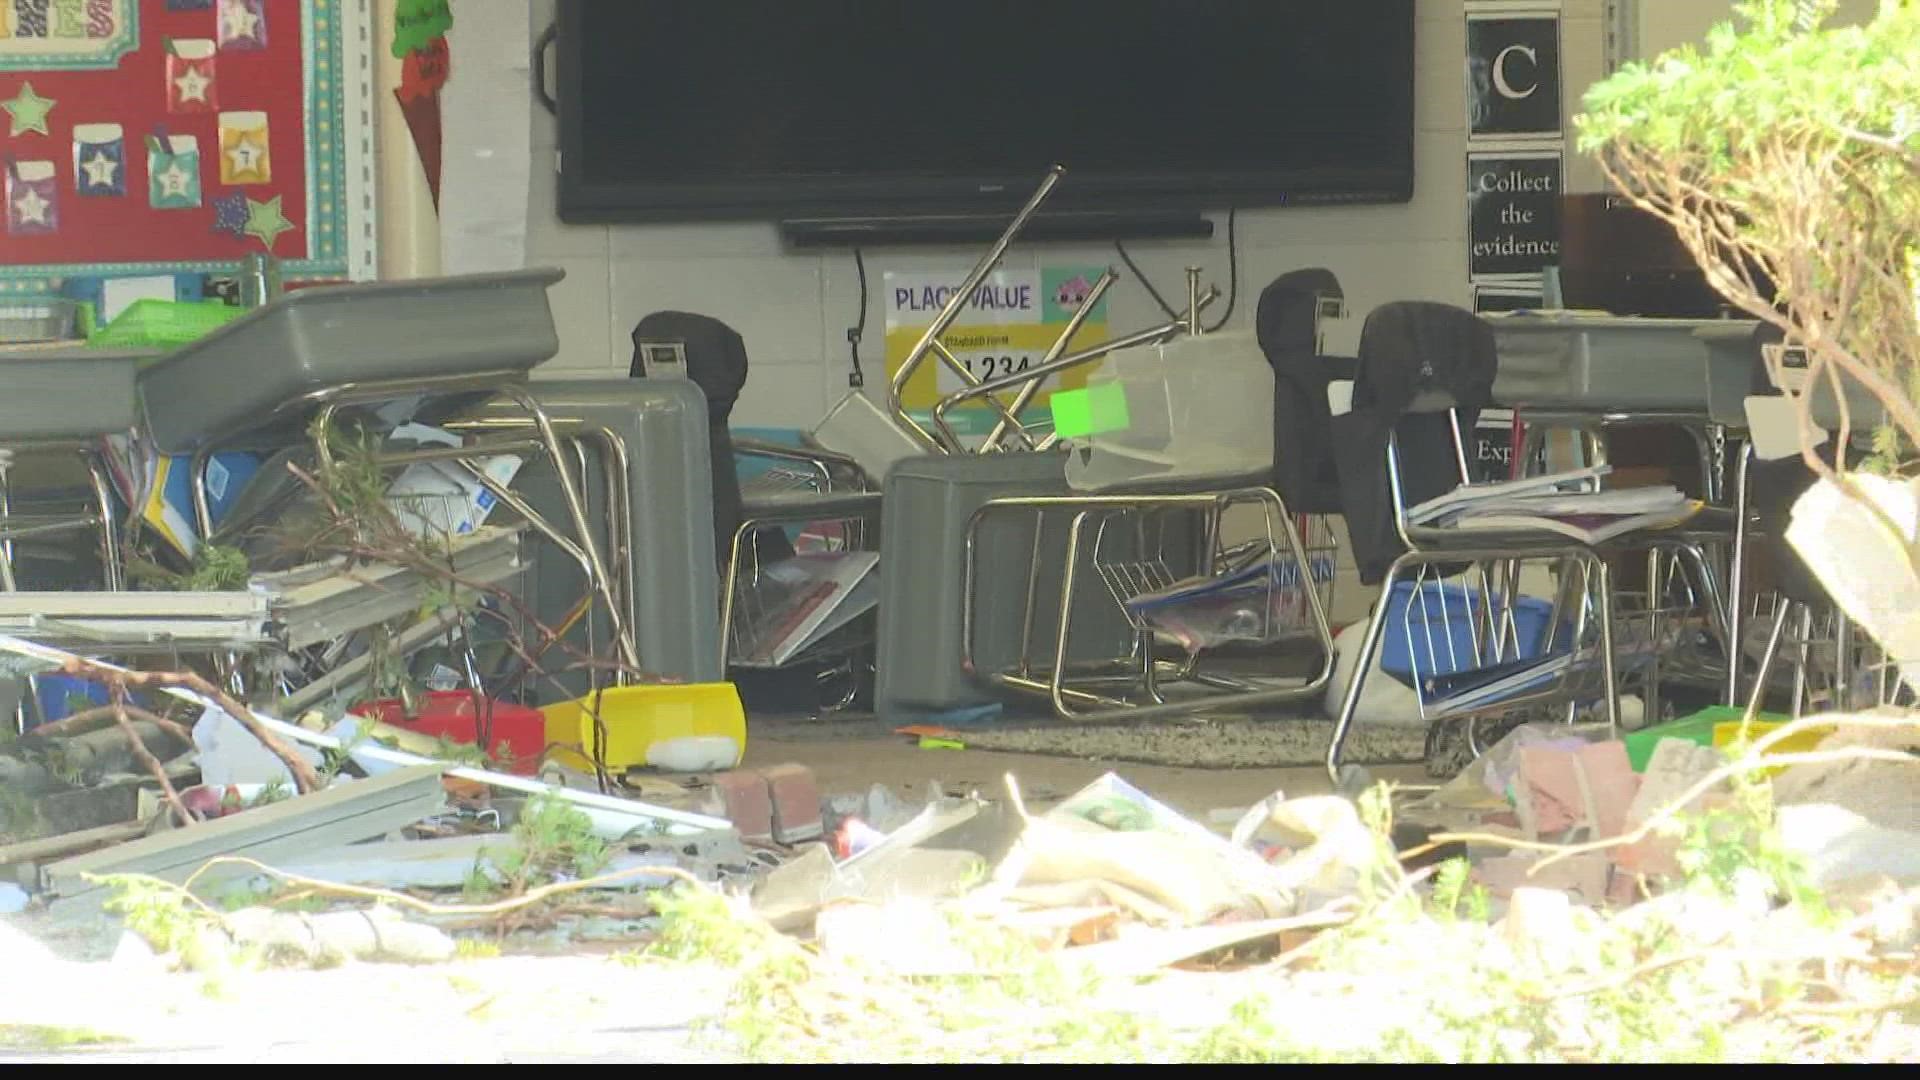 No students were inside the classroom during the incident. Douglas MacArthur Elementary closed for the day.